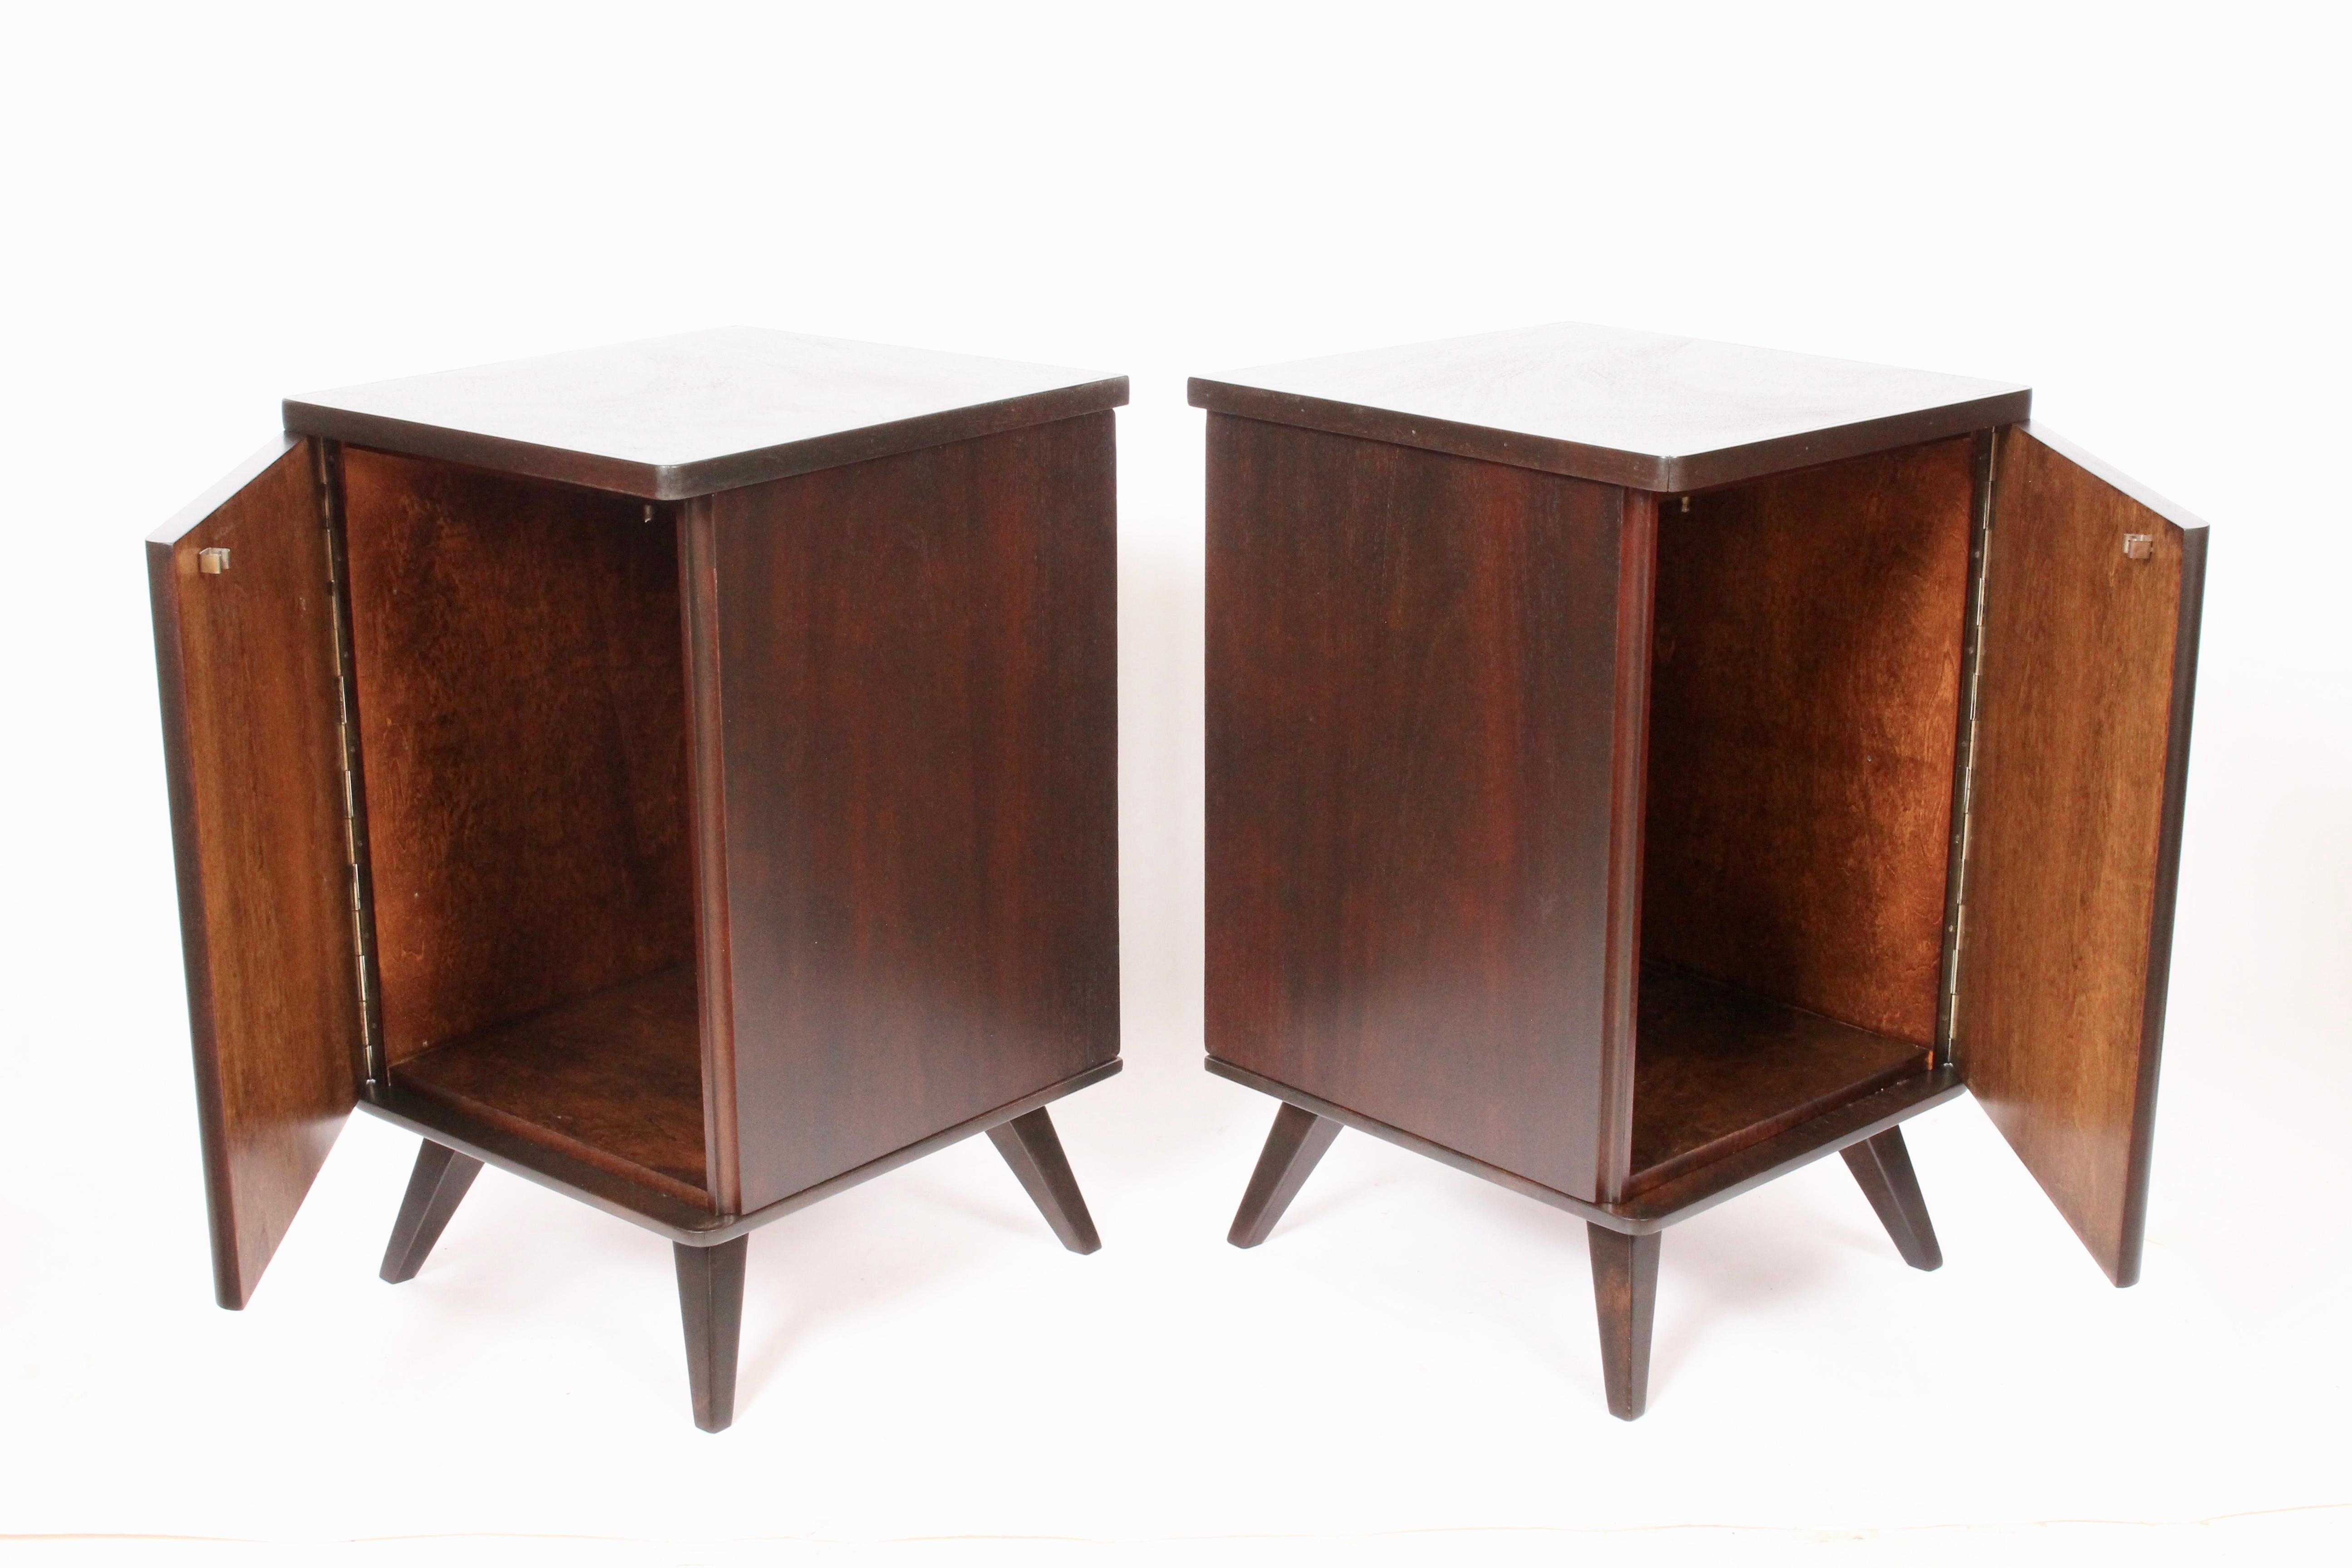 Pair of Swedish handcrafted dark walnut Bedside Cabinets, circa 1950. Featuring a finely crafted, sturdy square, beautifully grained Walnut frame on splayed legs with single piano hinged swing door providing large interior storage space. Excellent